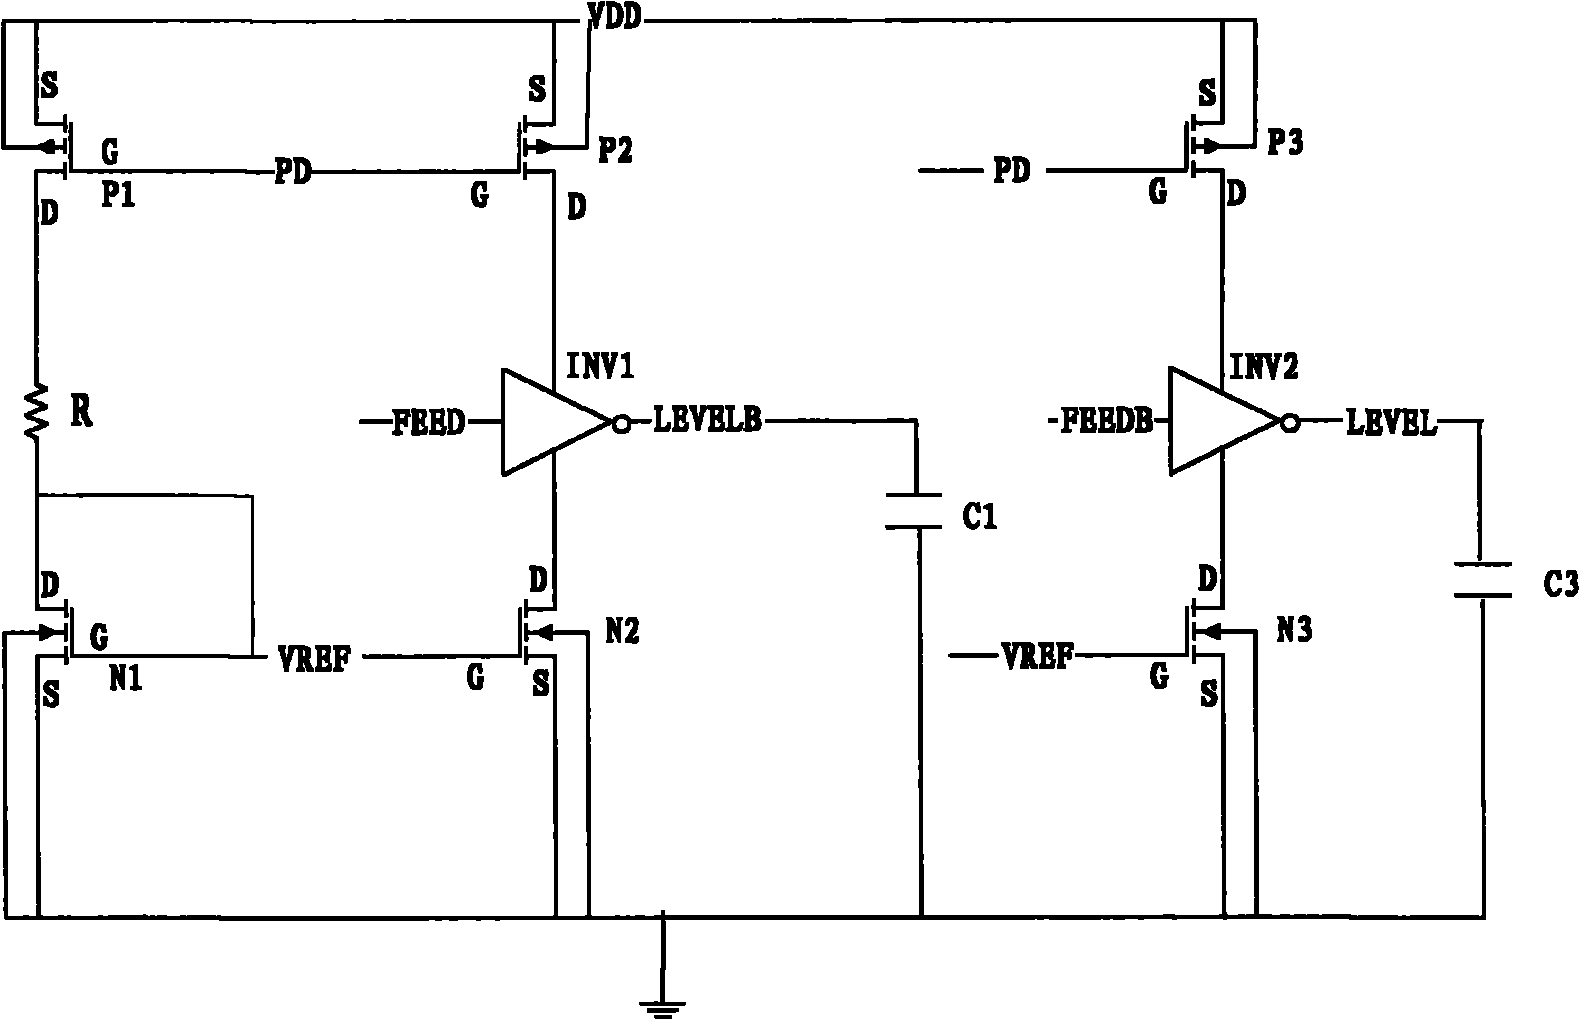 Resistance capacitance (RC) oscillator with low power consumption